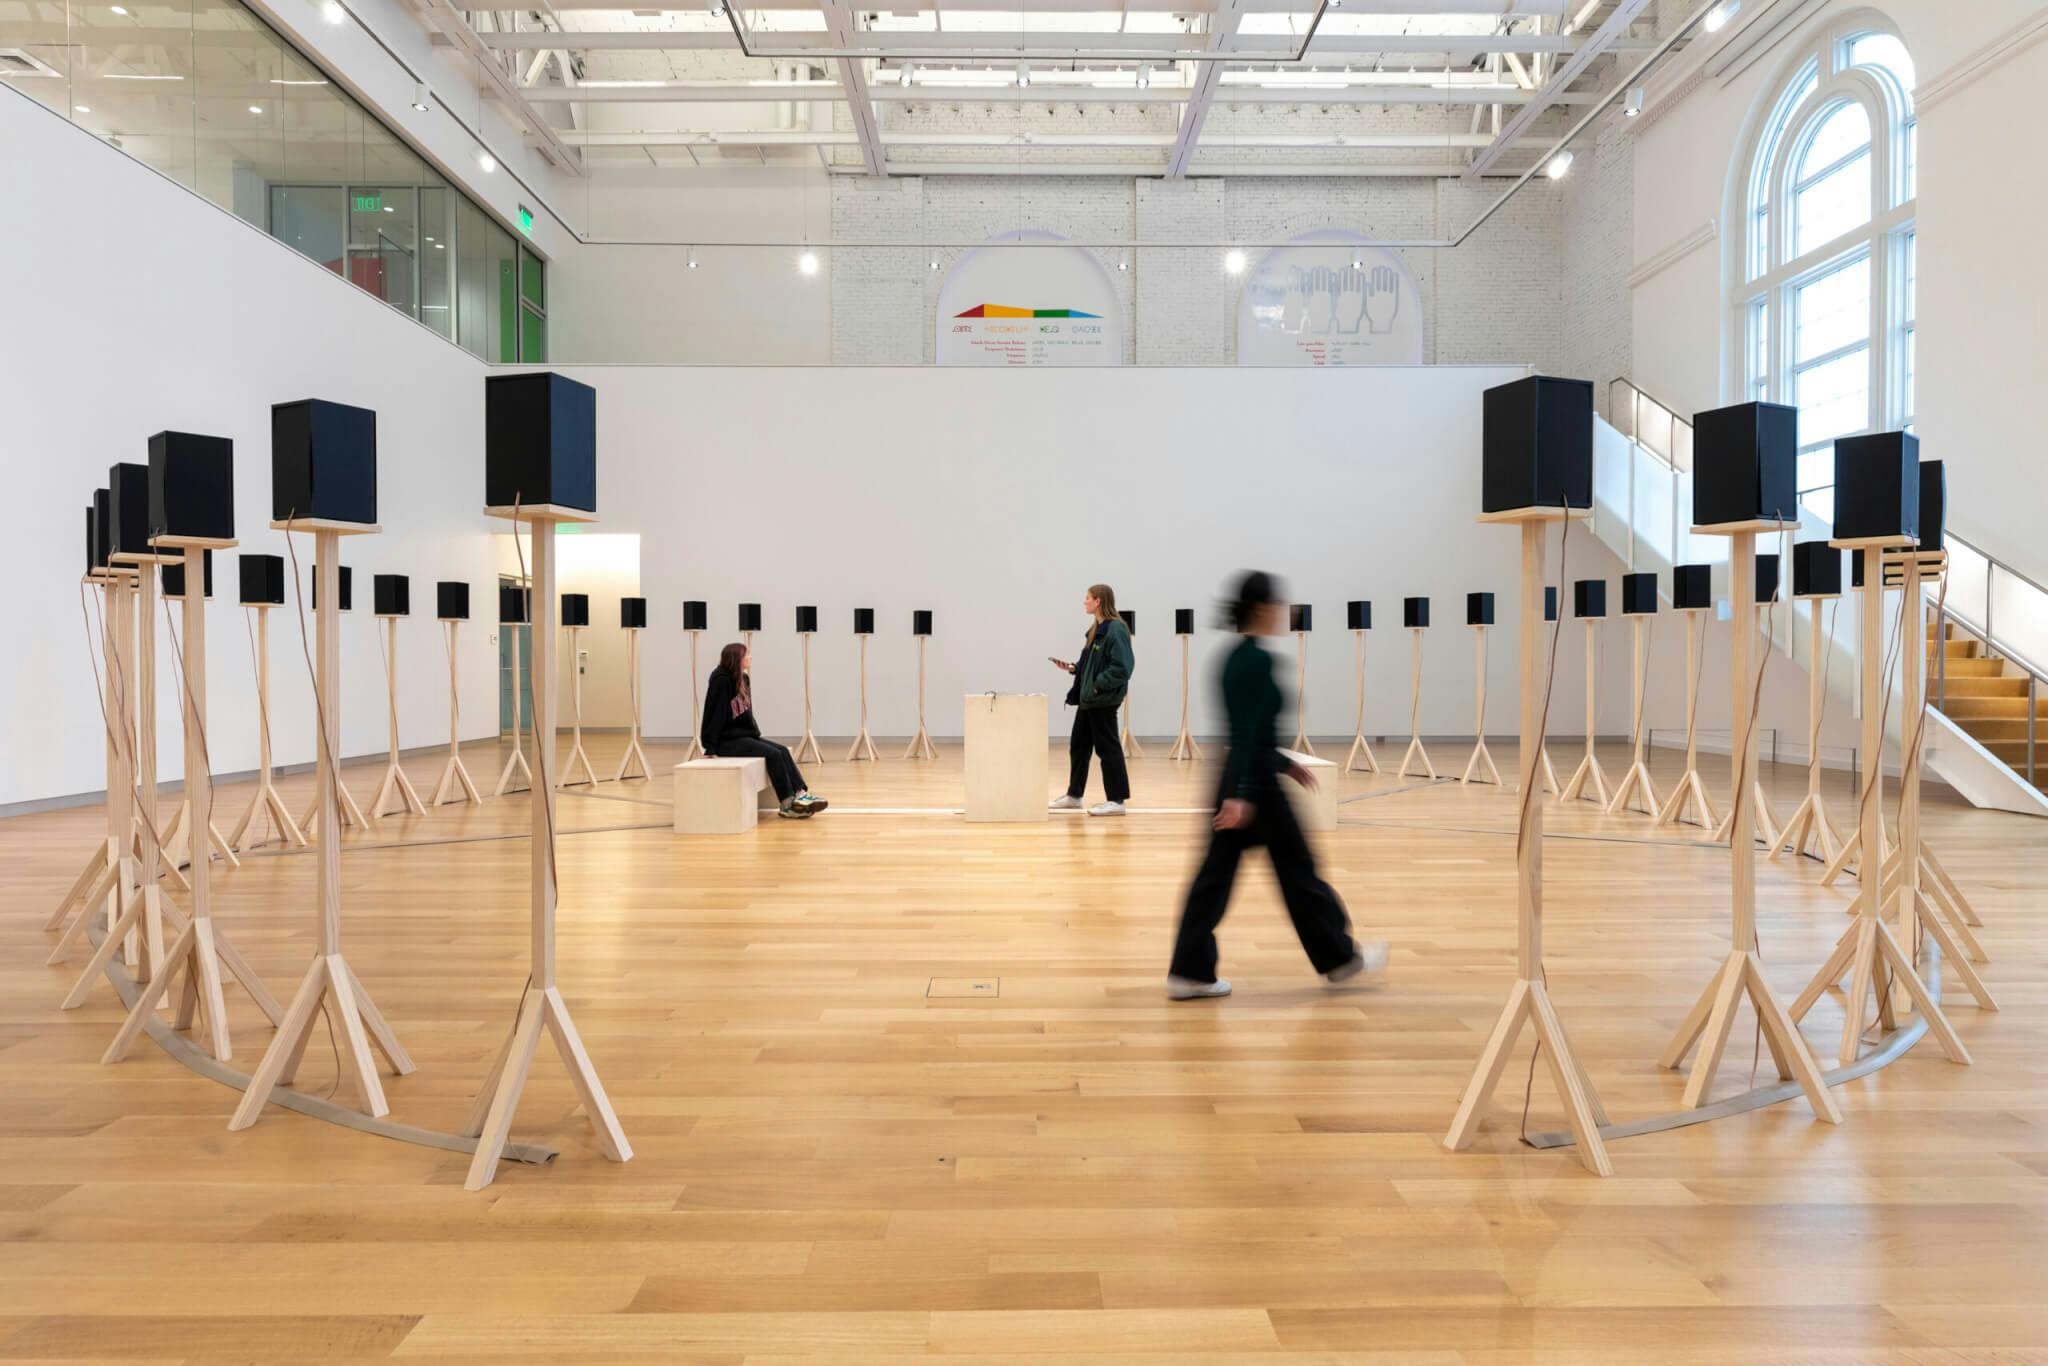 Forty speakers rest on stands, while three figures are positioned throughout the installation.